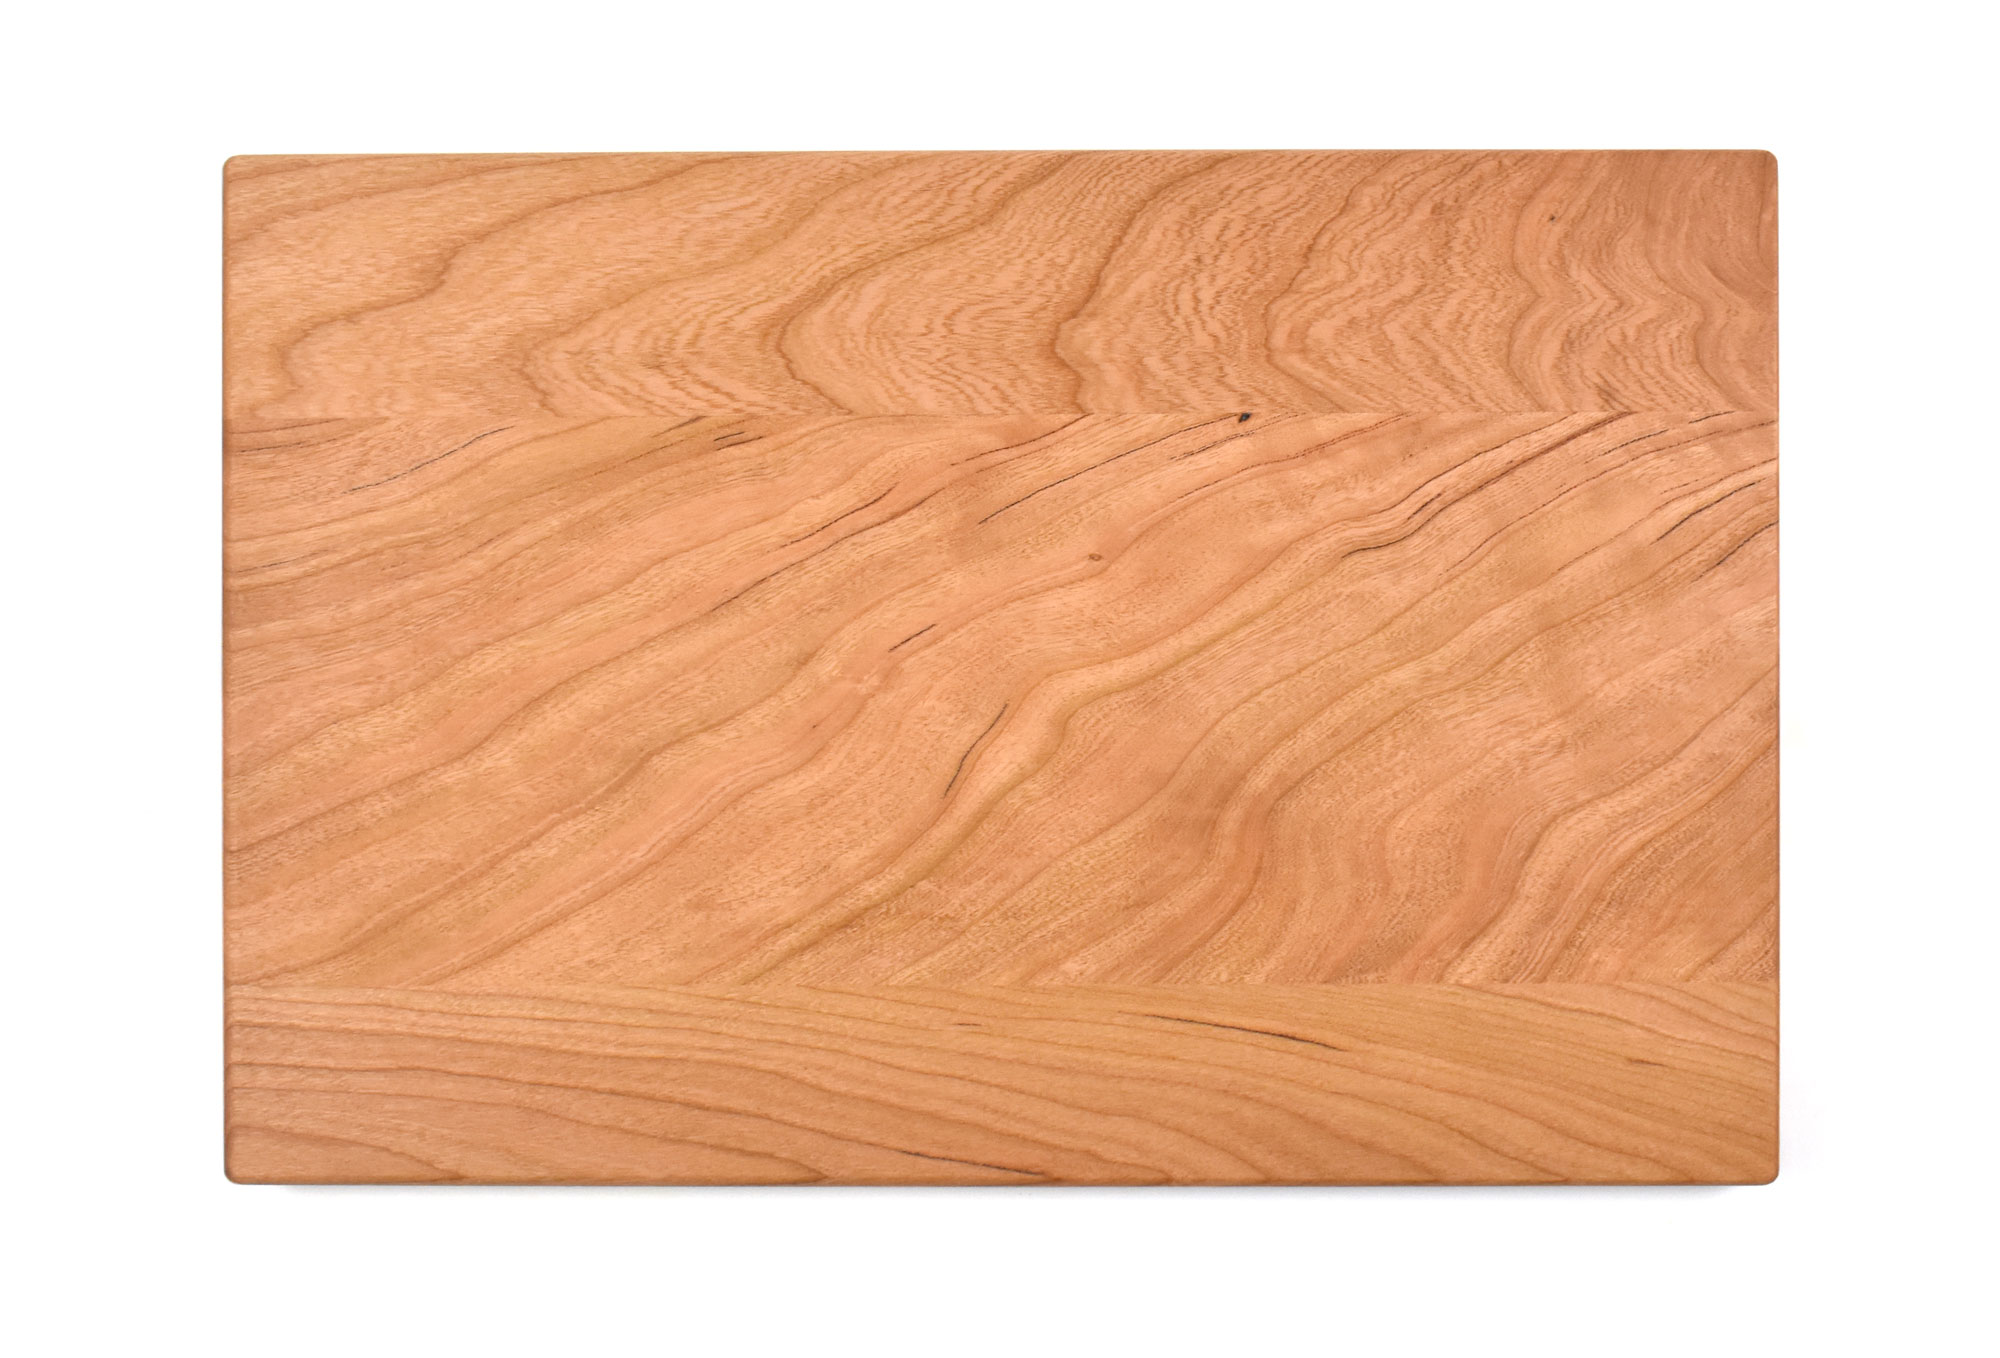 Small cherry board with rounded edges and juice groove